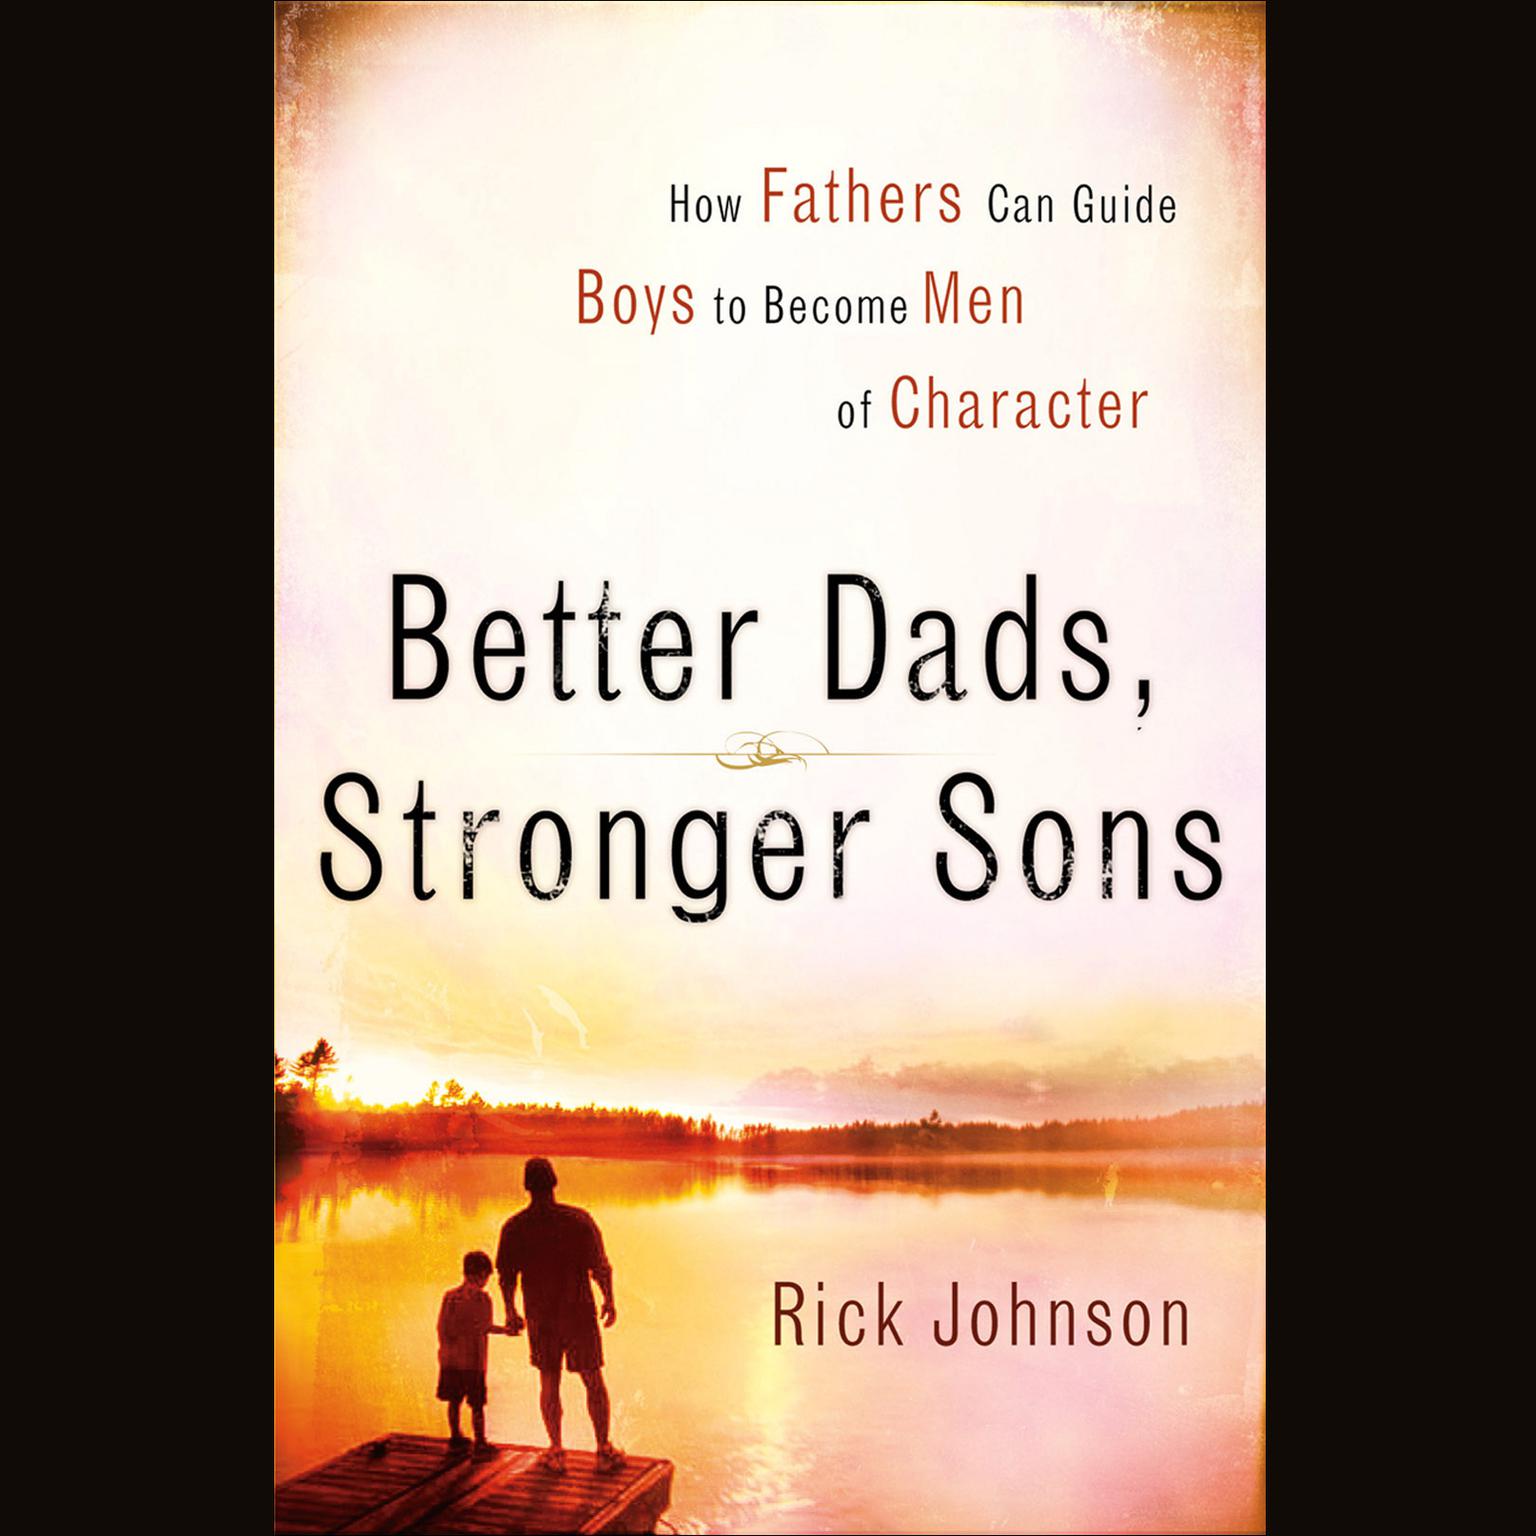 Better Dads, Stronger Sons: How Fathers Can Guide Boys to Become Men of Character Audiobook, by Rick Johnson